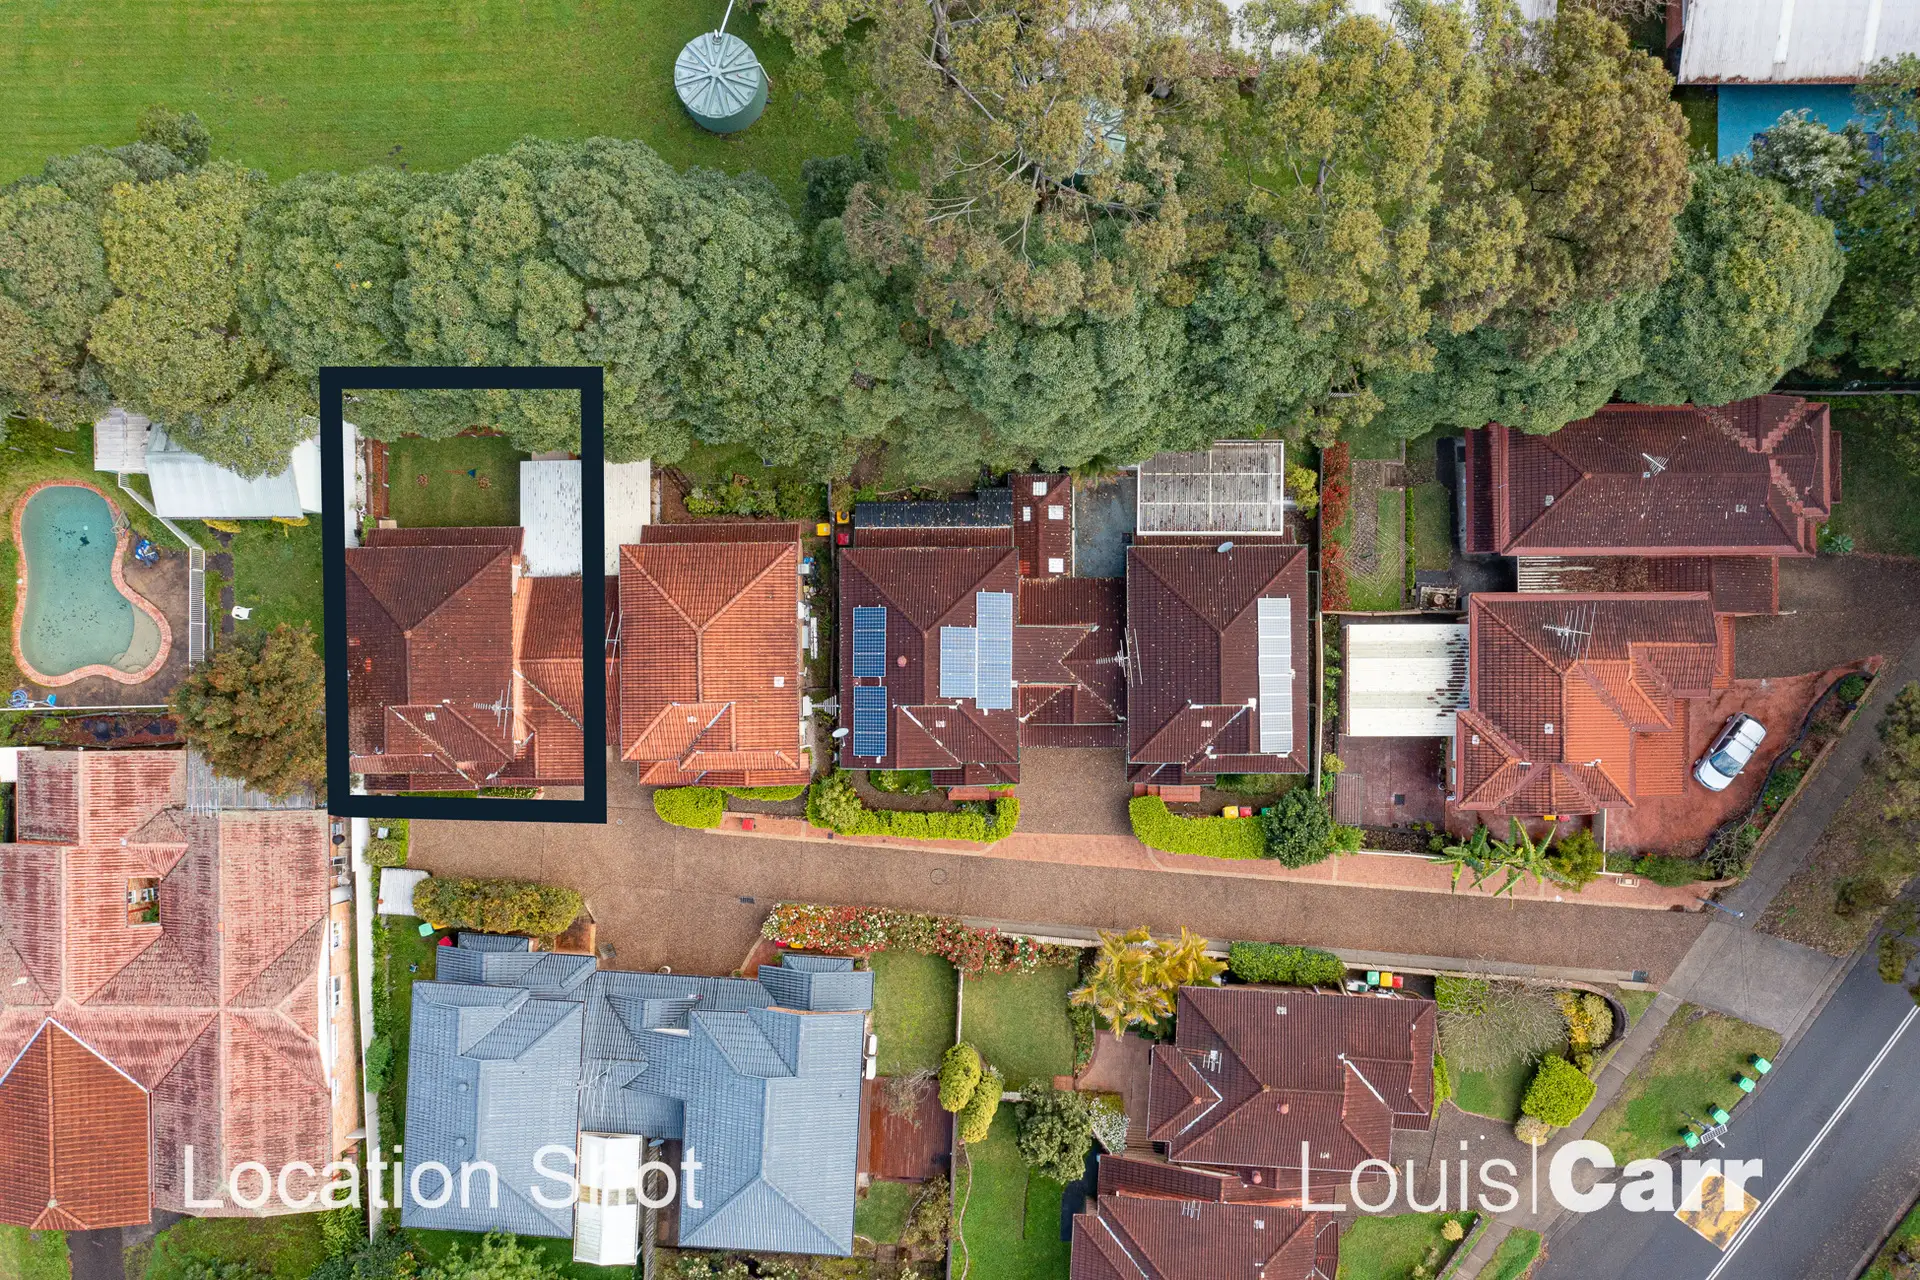 Photo #12: 4/64 Purchase Road, Cherrybrook - Sold by Louis Carr Real Estate